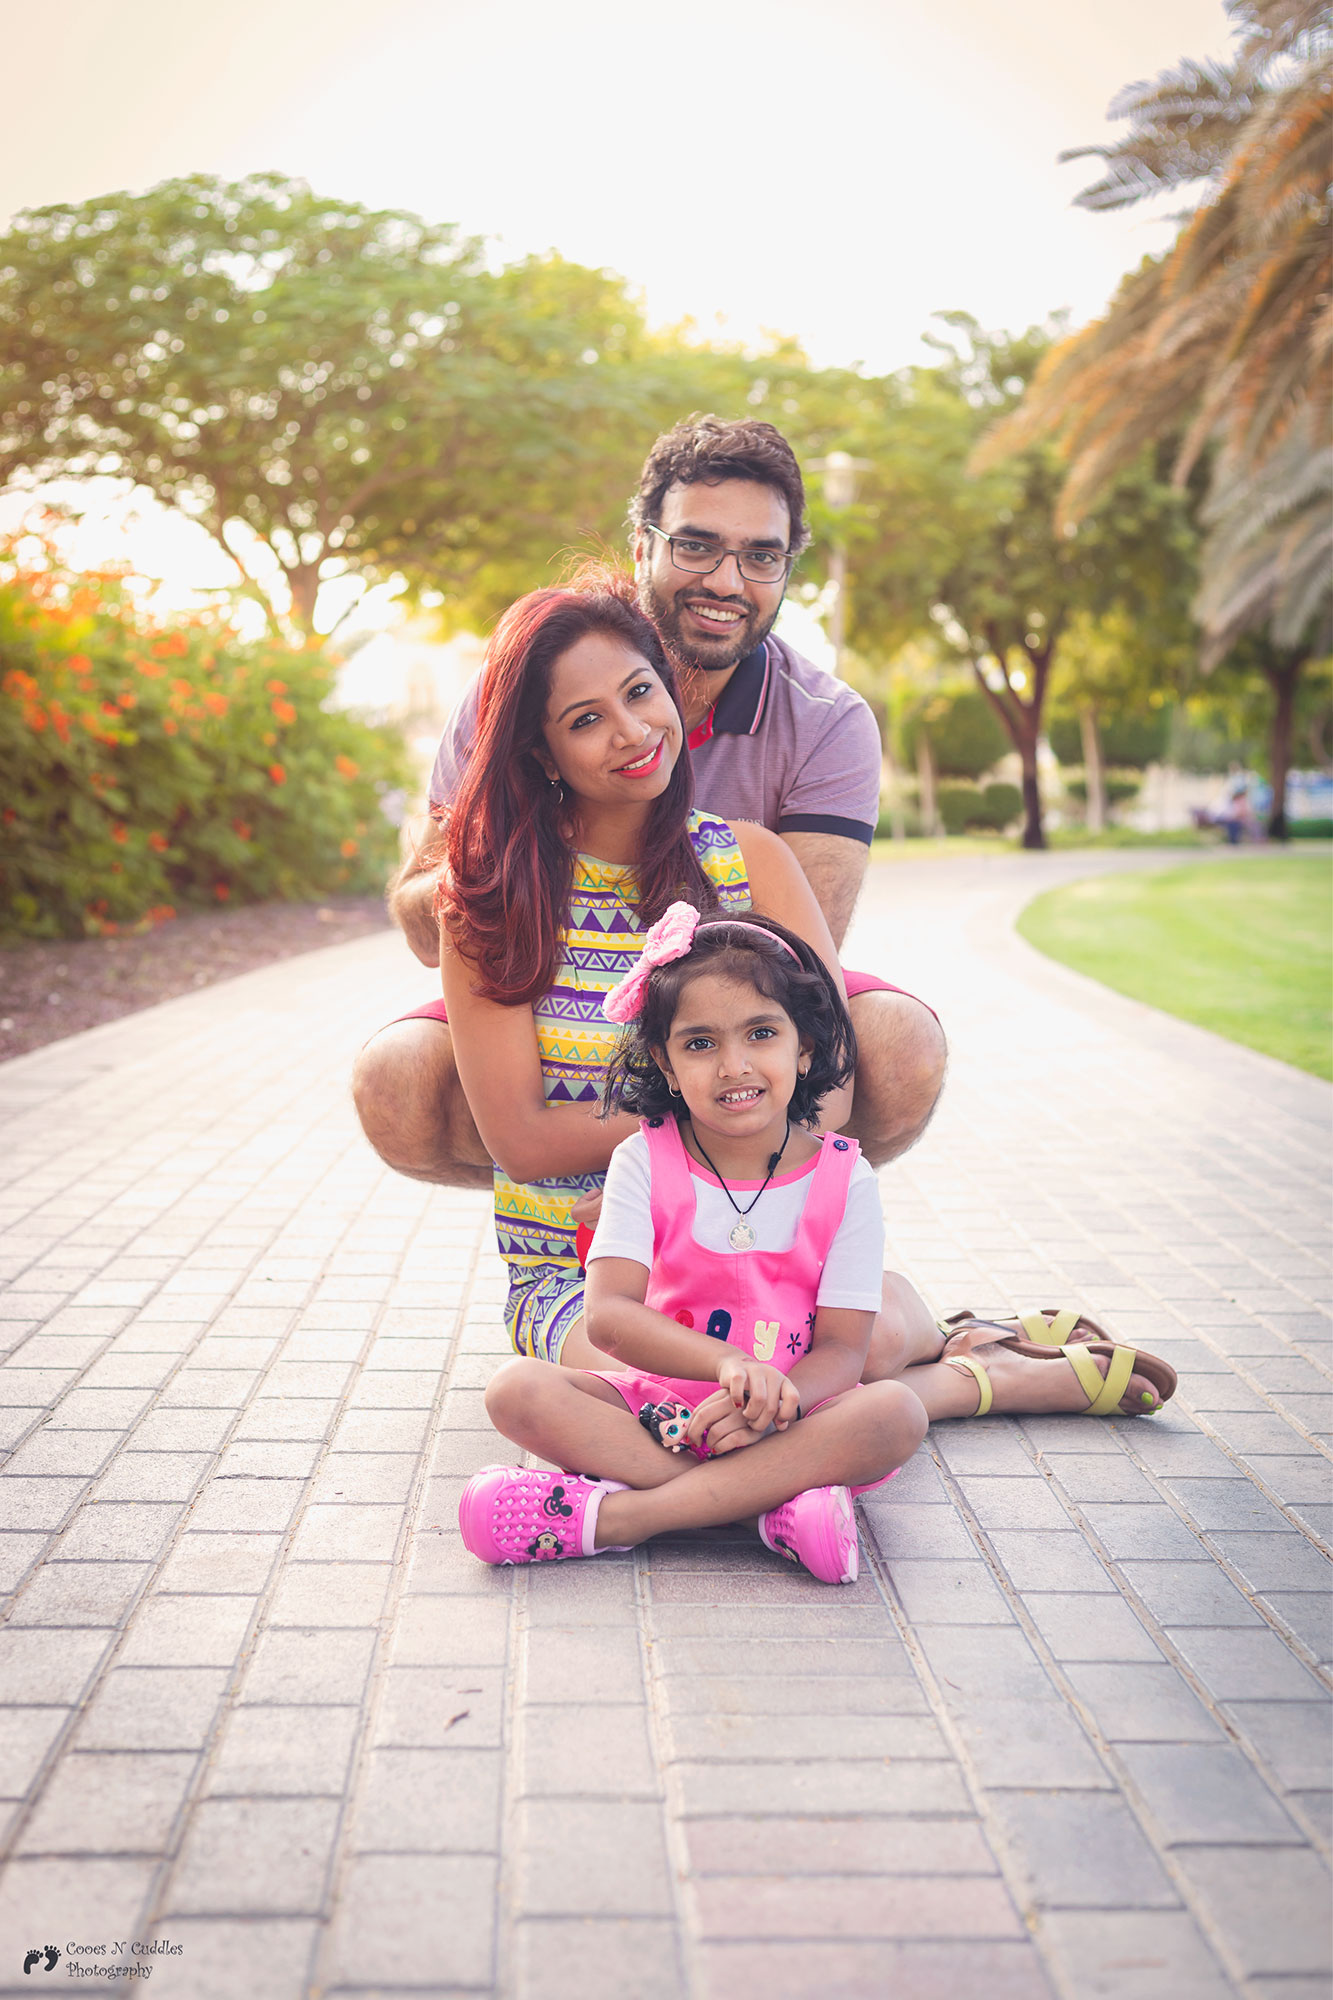 Family portraits Cooes N Cuddles photography Dubai family Photographer